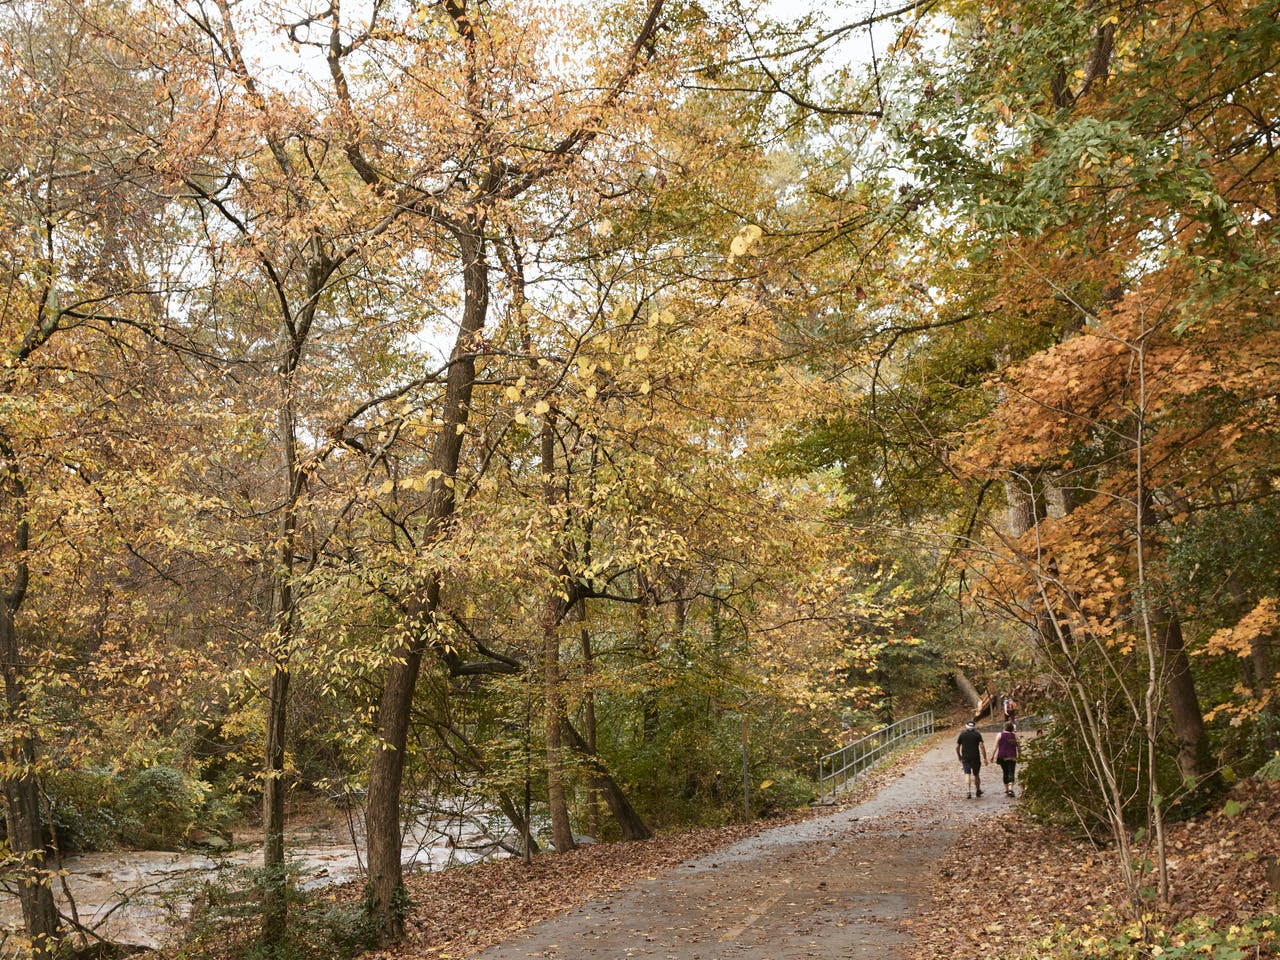 A couple walks on a path, surrounded by trees with fall colors.